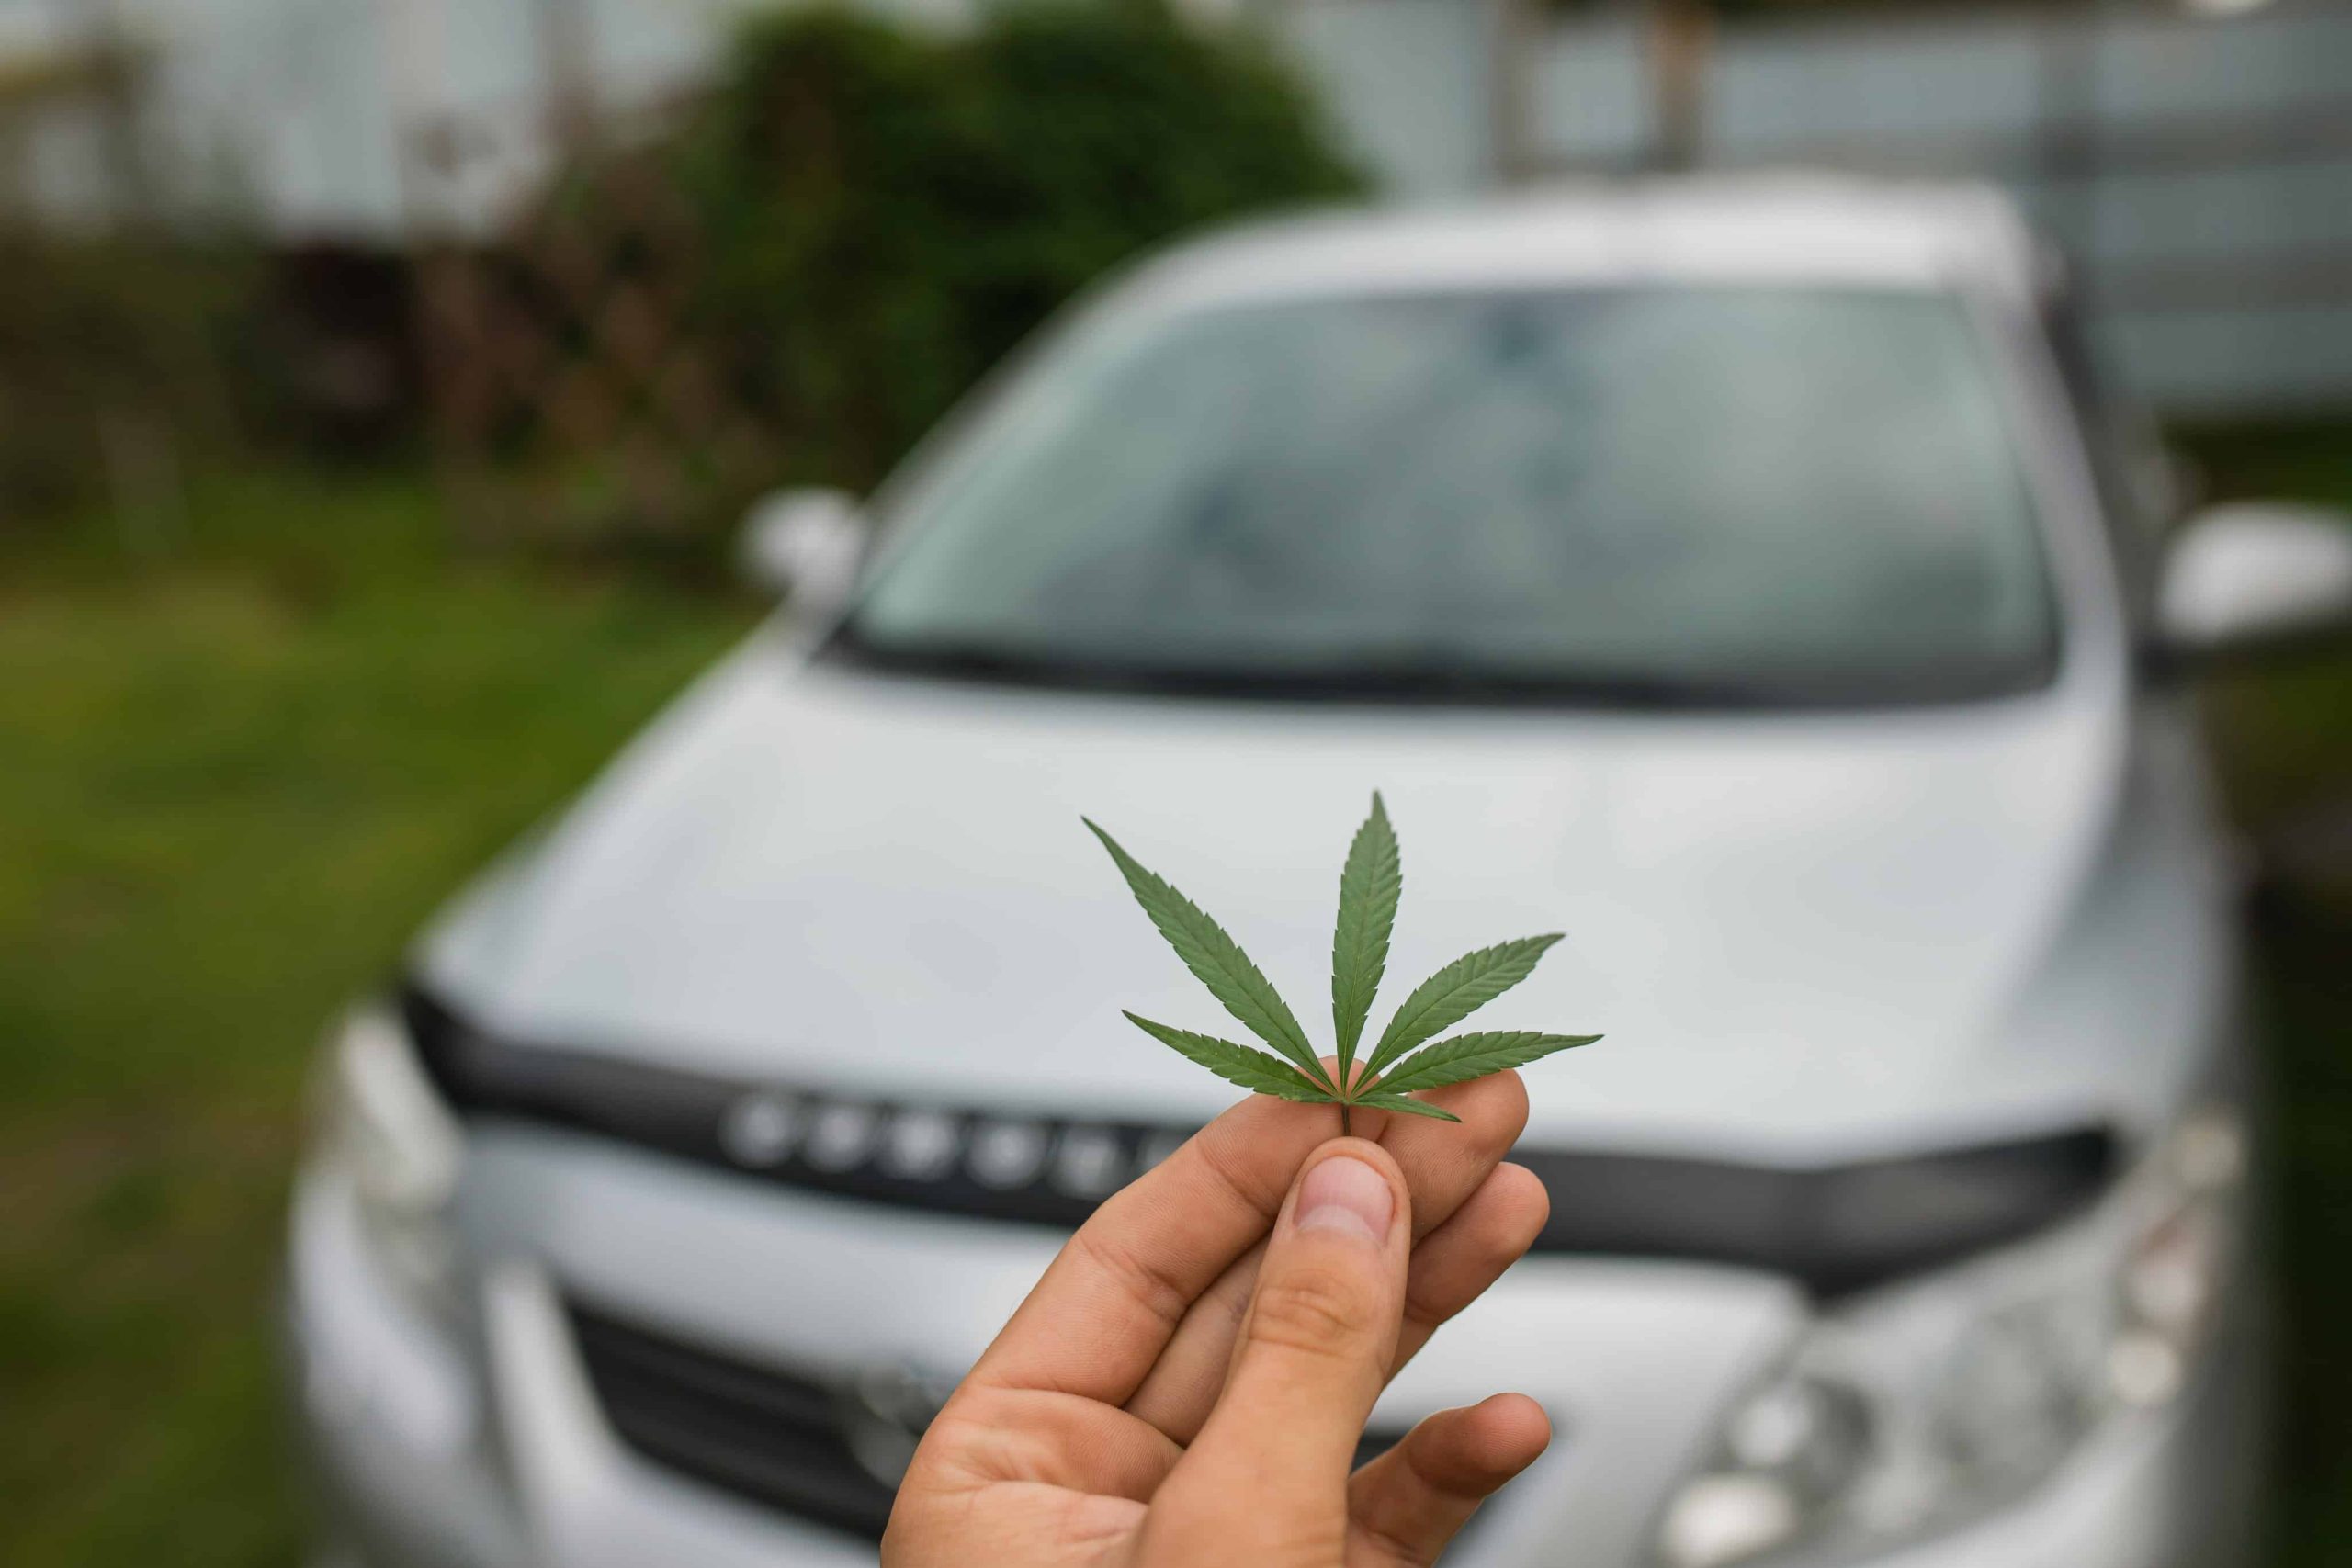 Only a Quarter of Virginia Drivers Said Driving on Pot is ‘Extremely Dangerous,’ Survey Shows